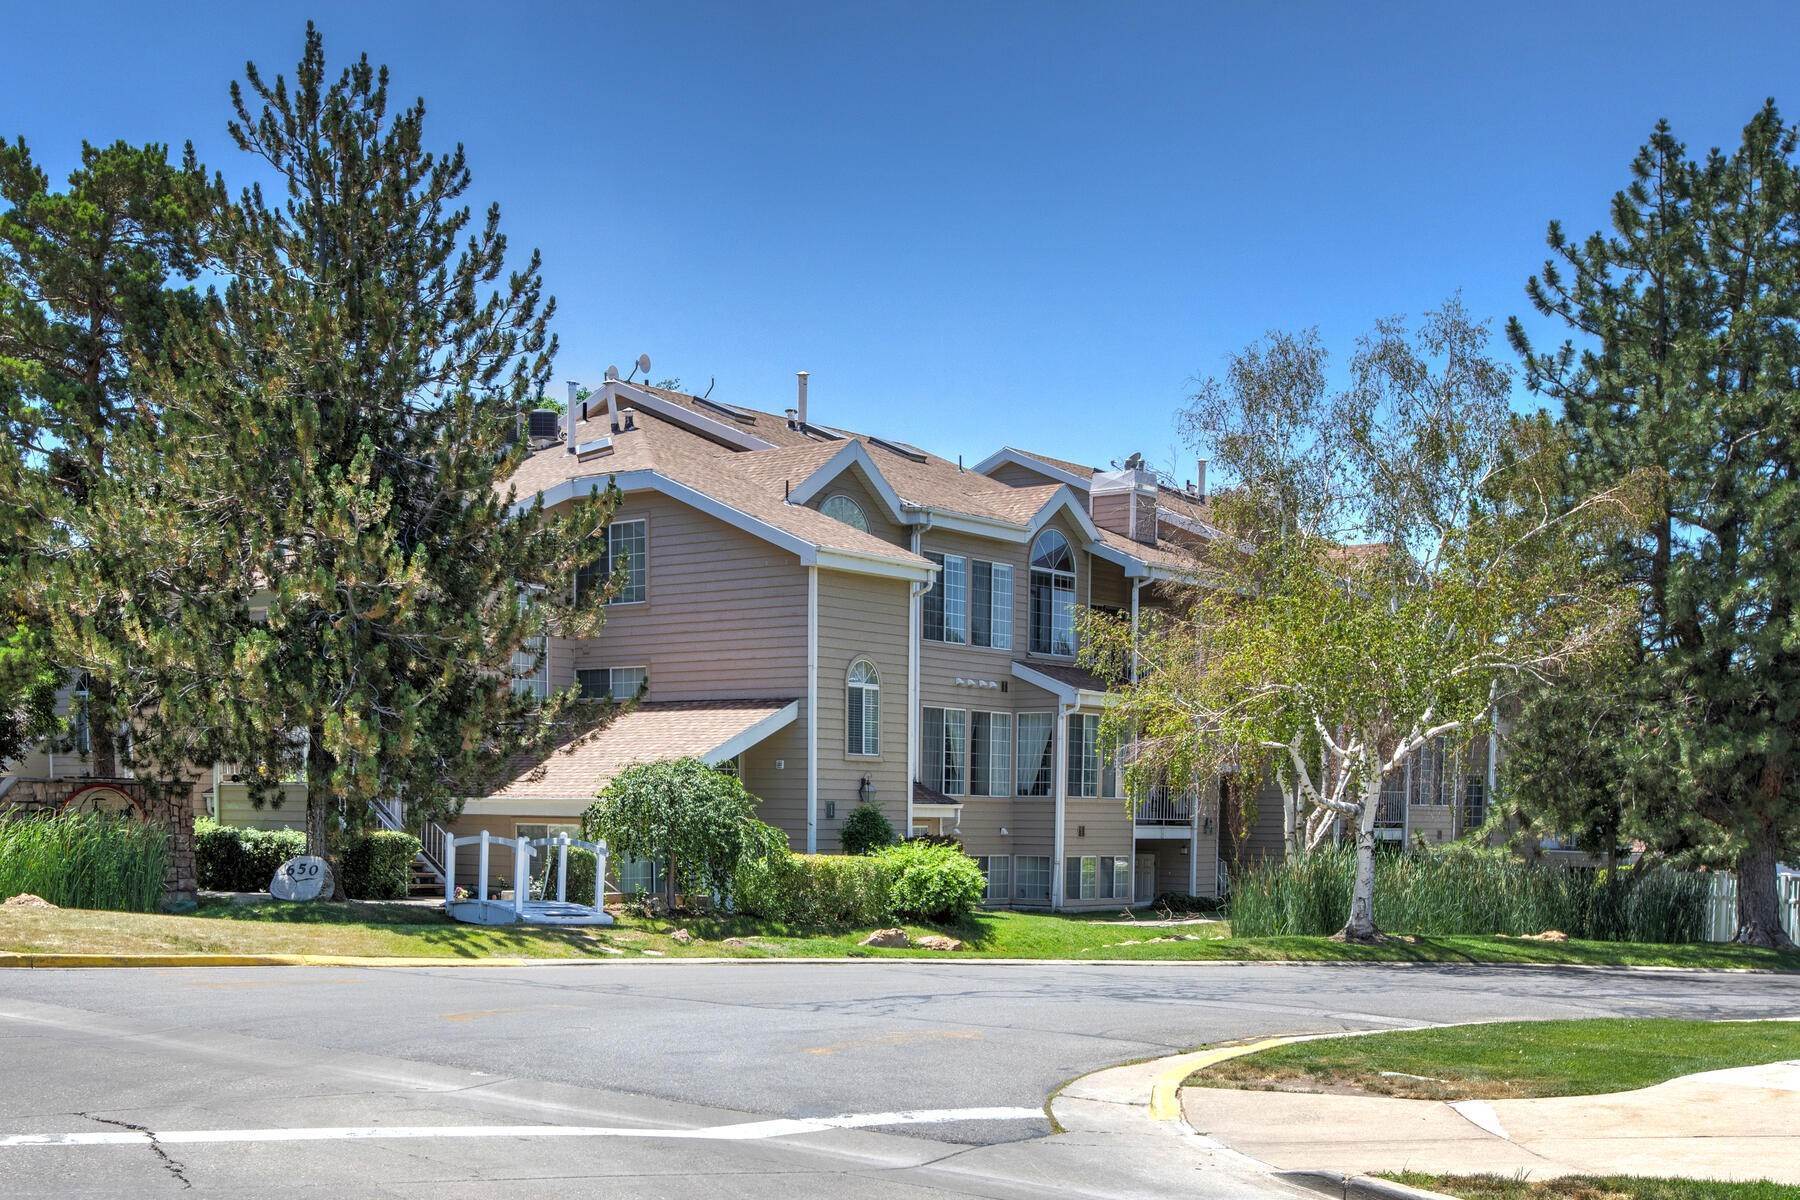 Condominiums for Sale at Delightful Condo in the Enchanting Bountiful Carriage Crossing Community! 650 S Main St #6205 Bountiful, Utah 84010 United States